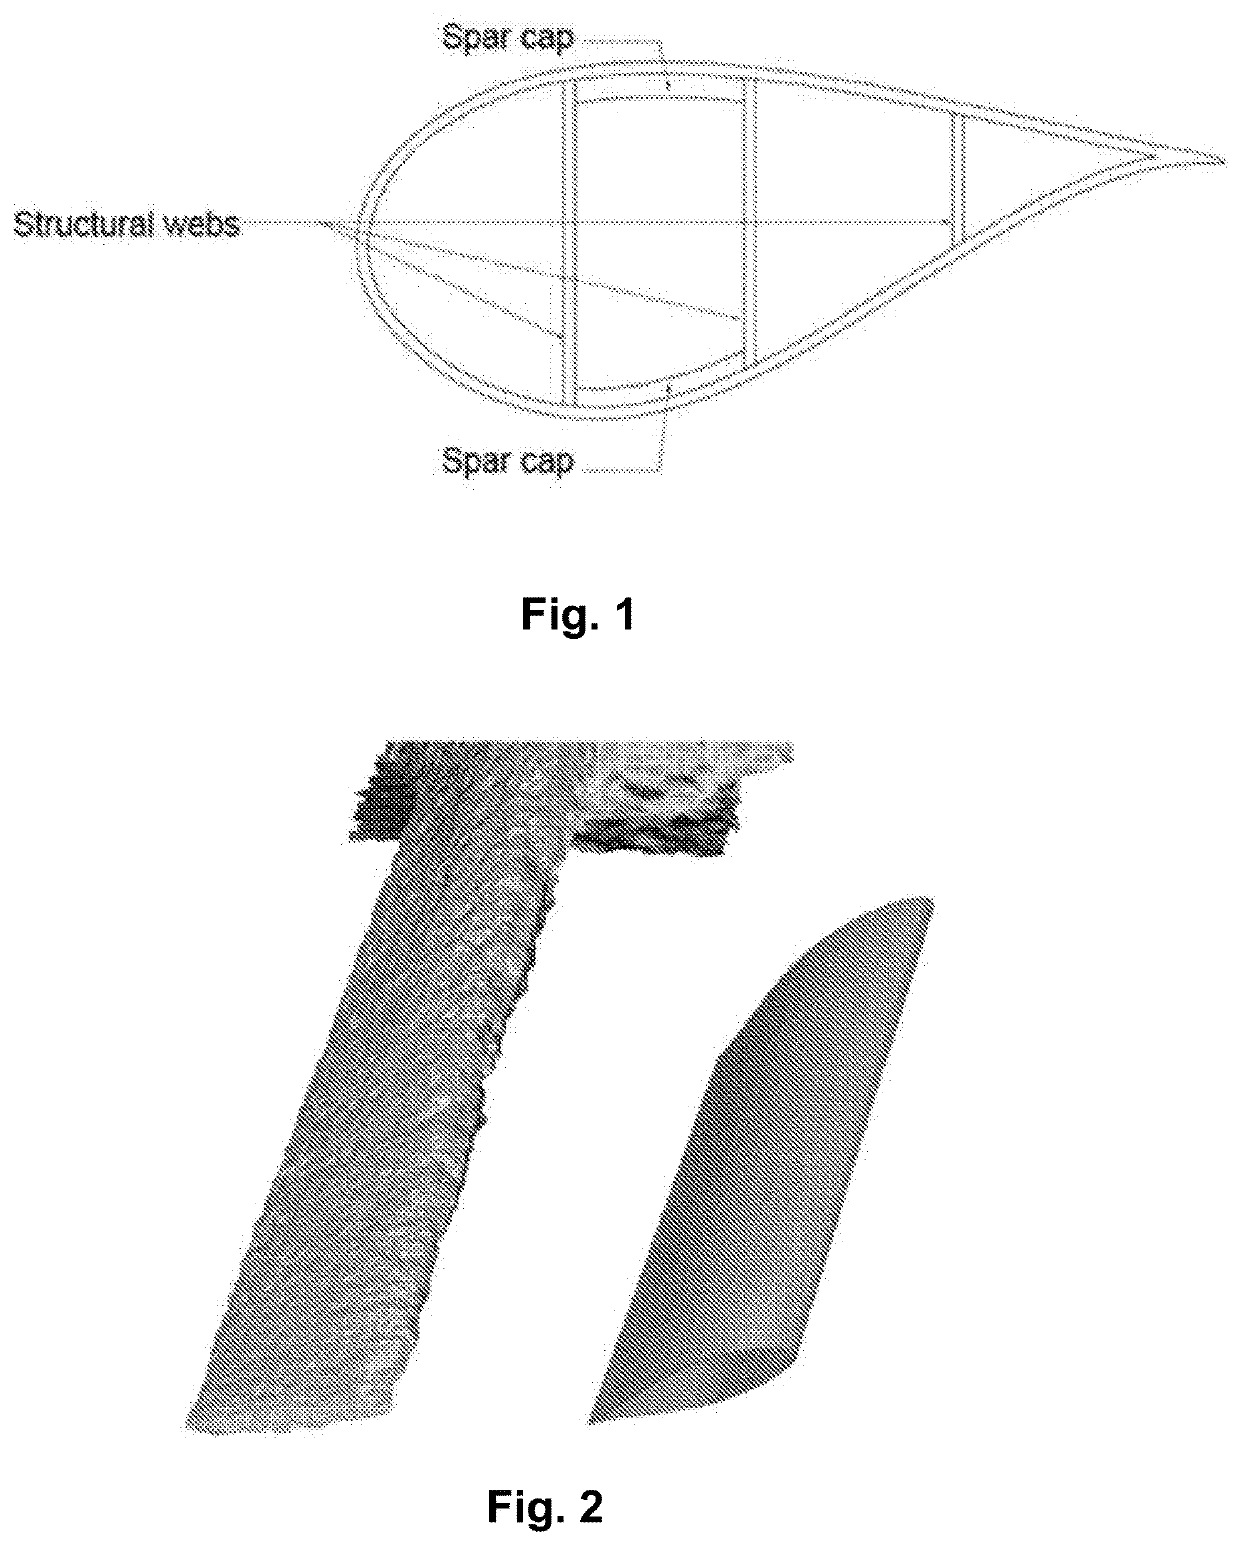 Systems and Methods for Predicting the Geometry and Internal Structure of Turbine Blades